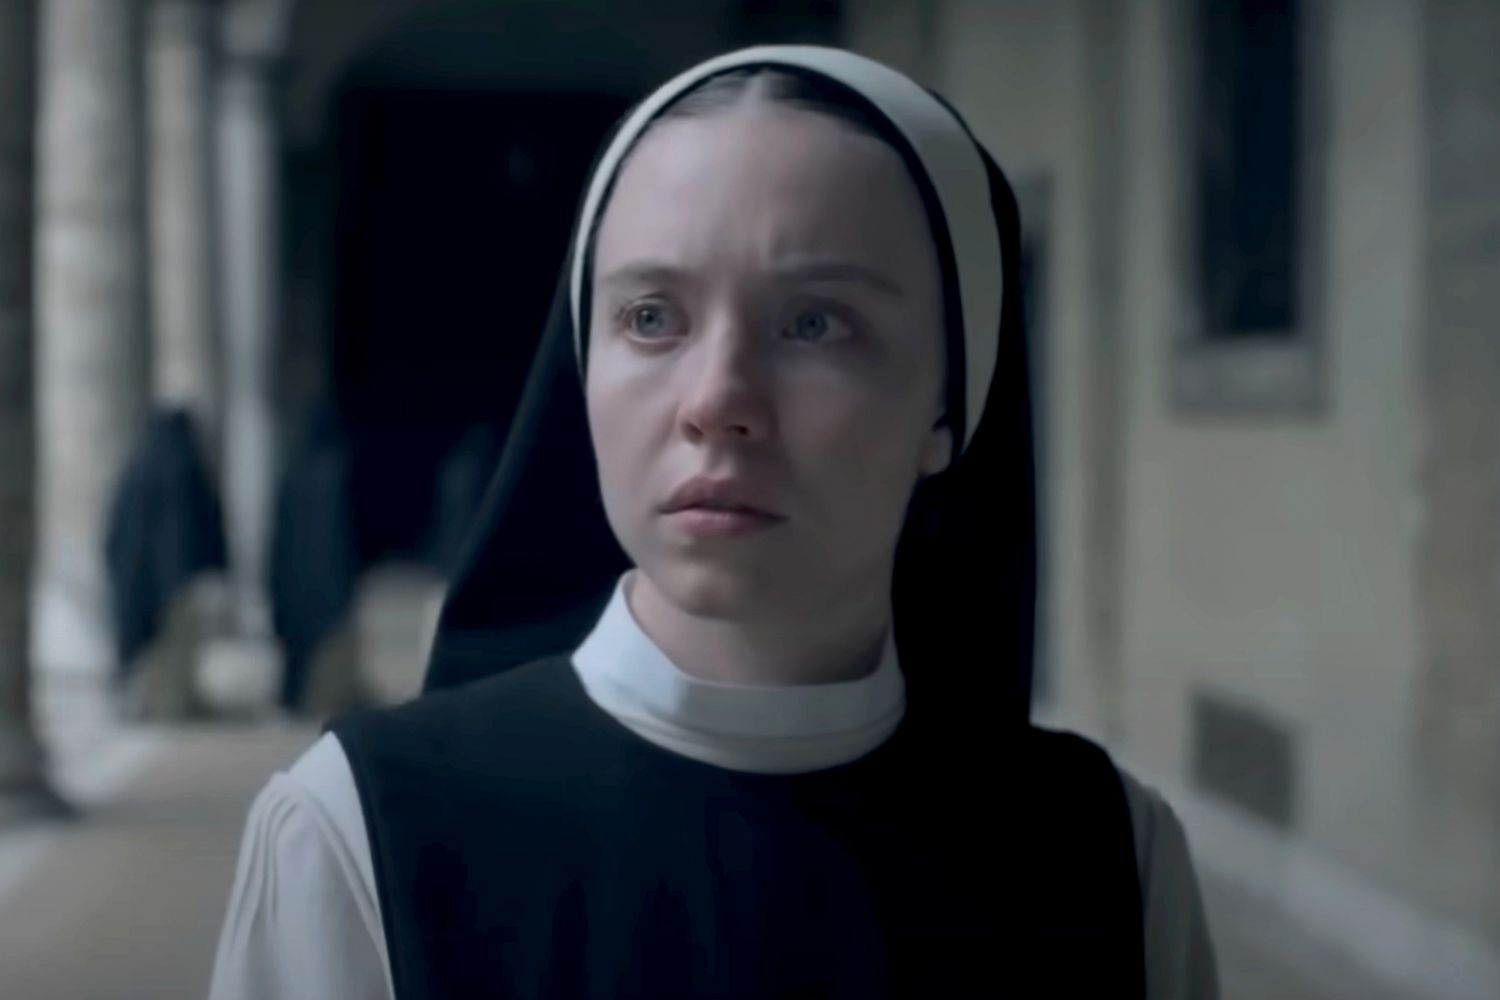 Sydney Sweeney plays Sister Cecilia in Immaculate